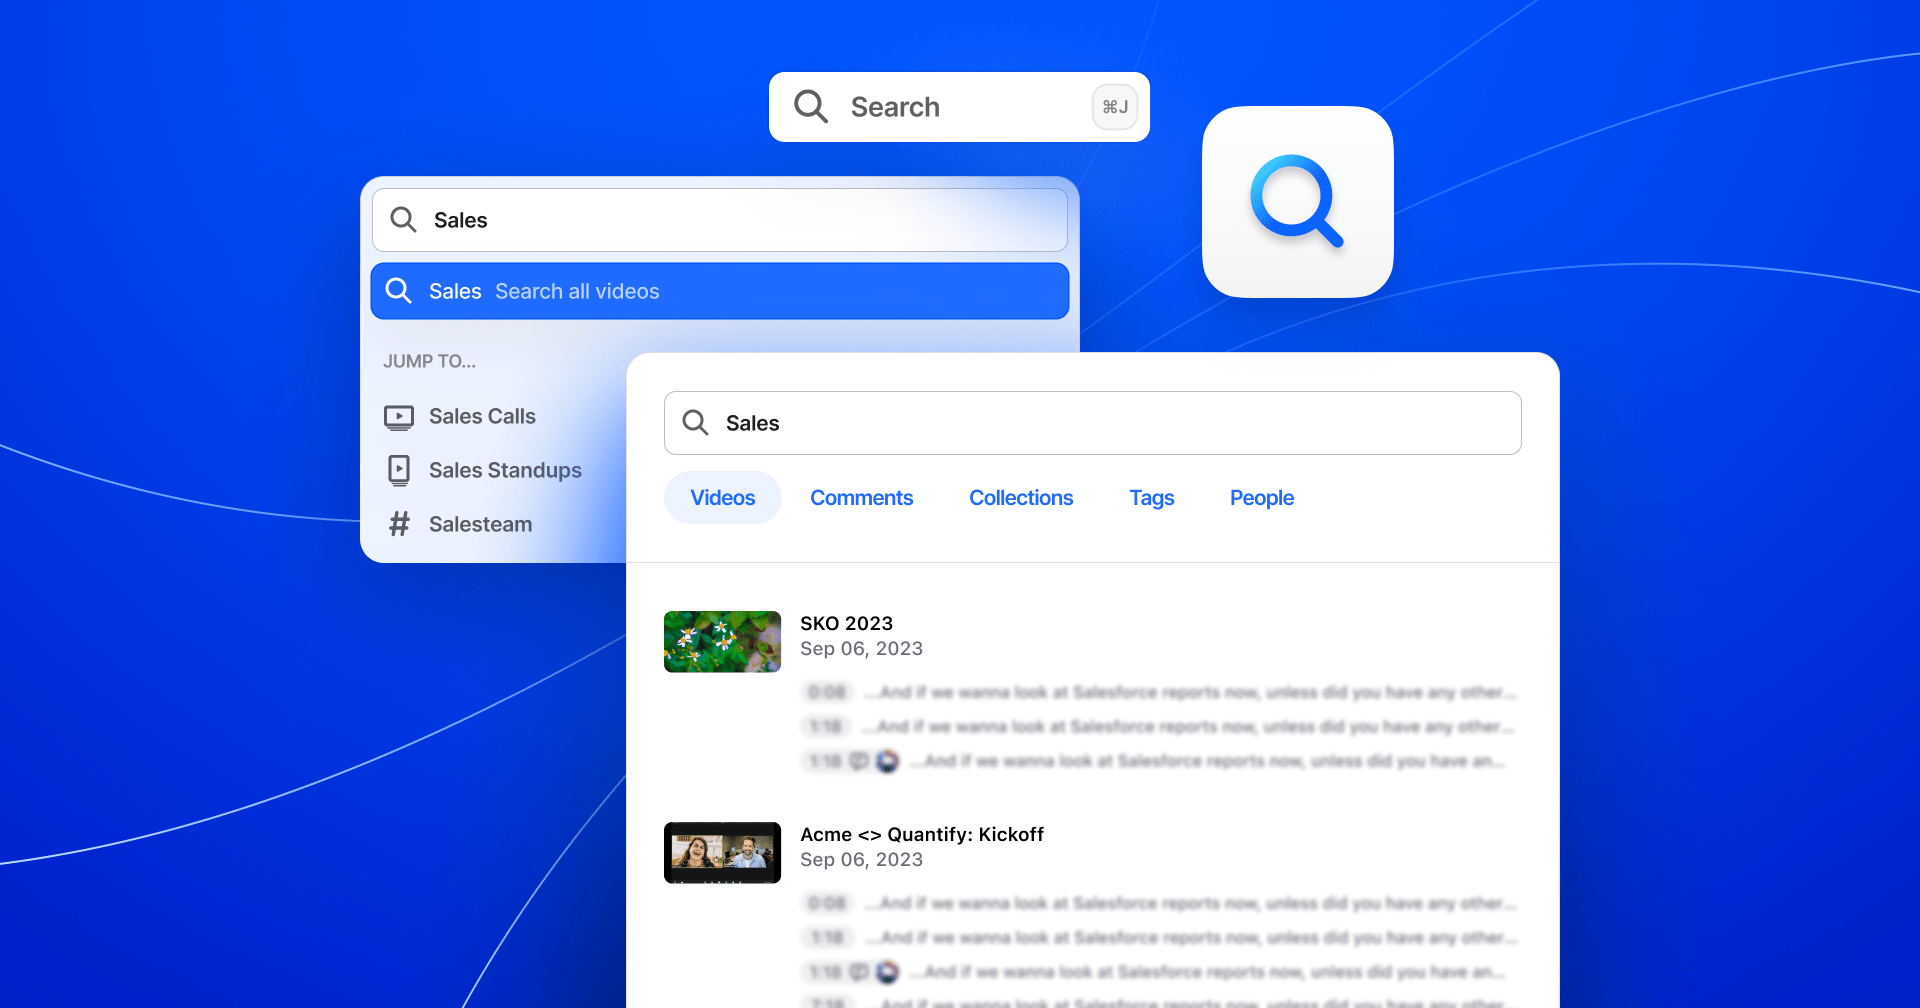 A collage of Rewatch navigational and search UI elements along with a search icon on a bright blue background